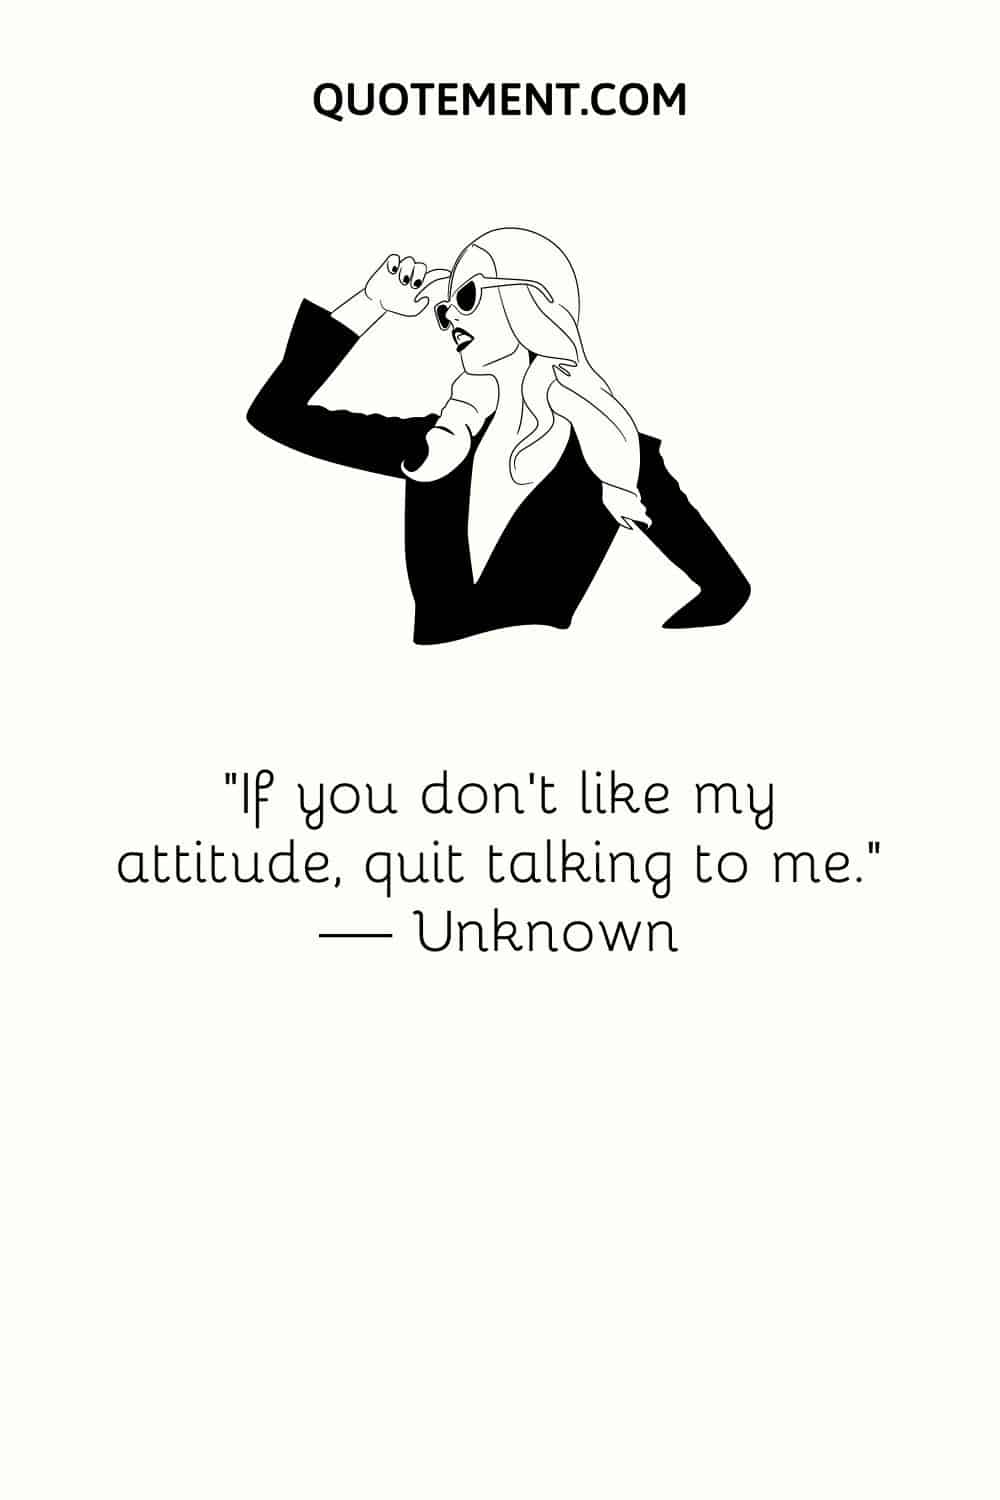 “If you don’t like my attitude, quit talking to me.” — Unknown